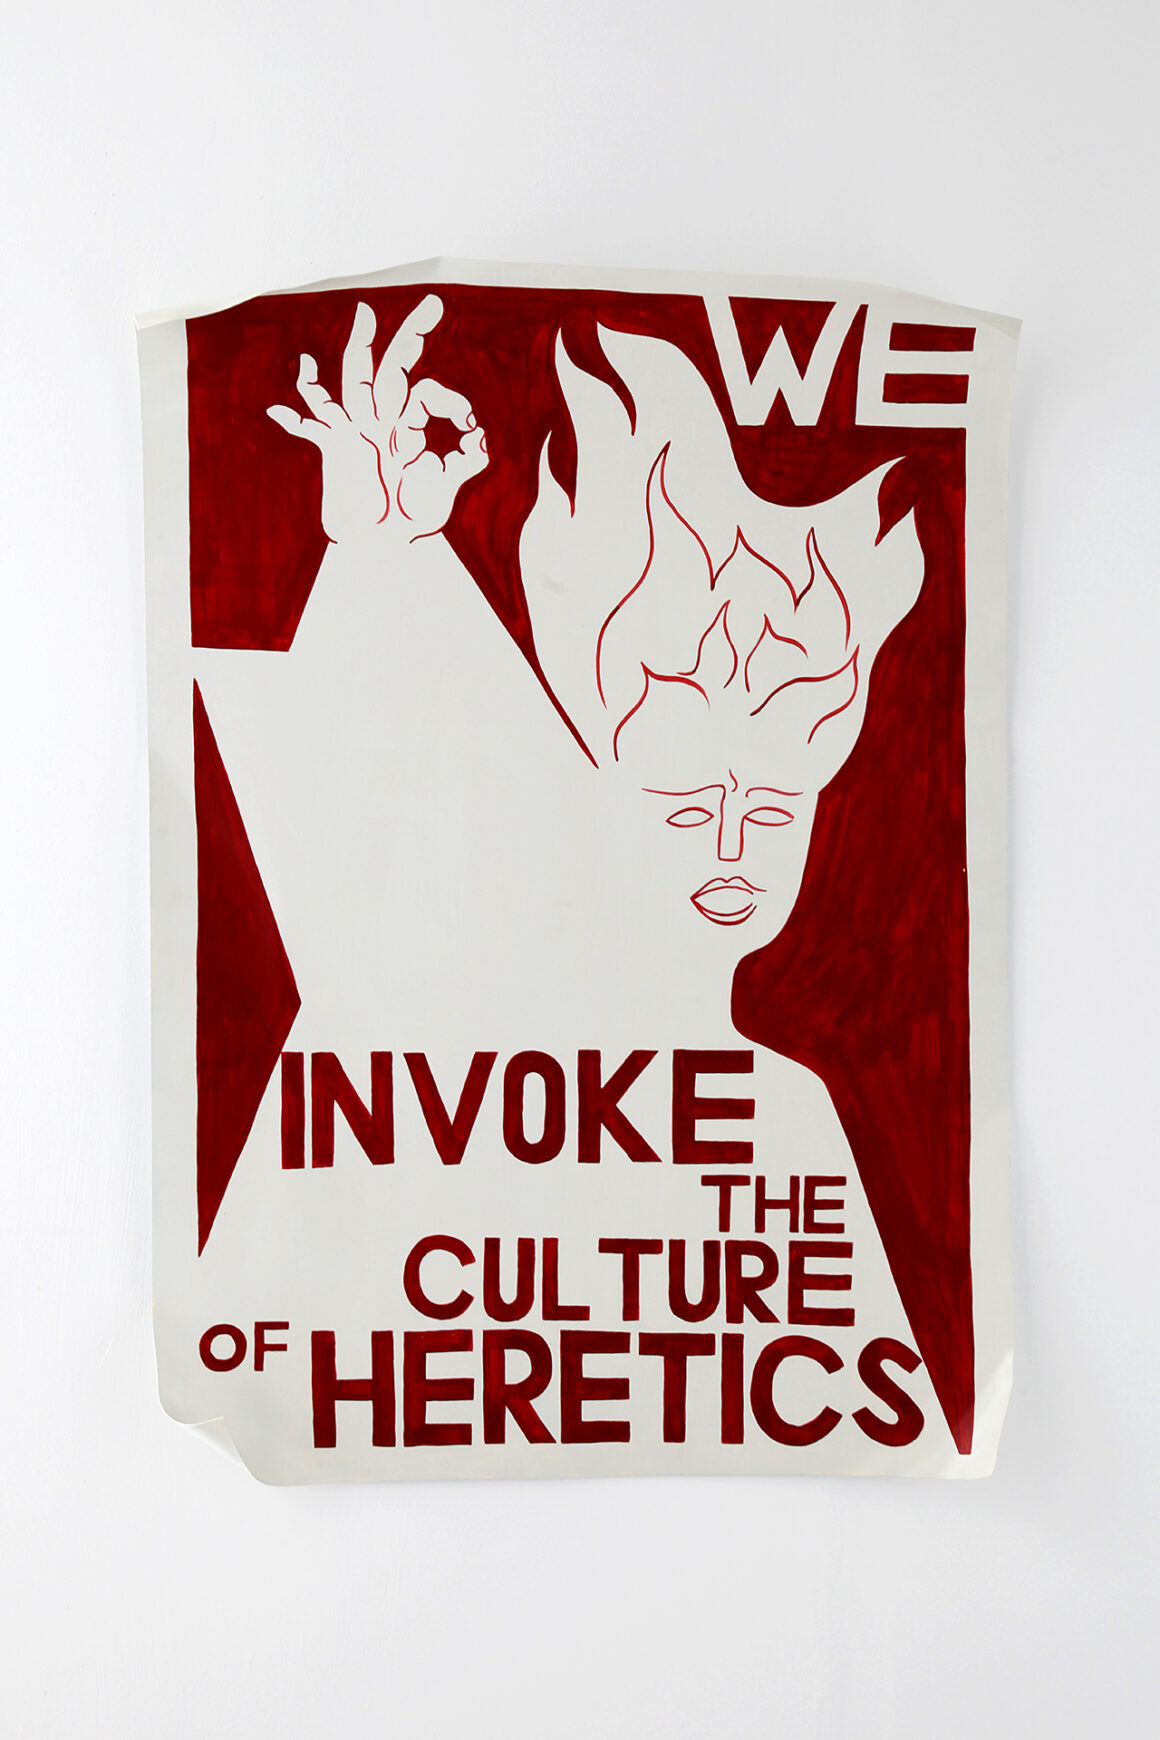 Anna Bunting-Branch, W.I.T.C.H. (“We Invoke the Culture of Heretics”), 2015. © Anna Bunting-Branch.